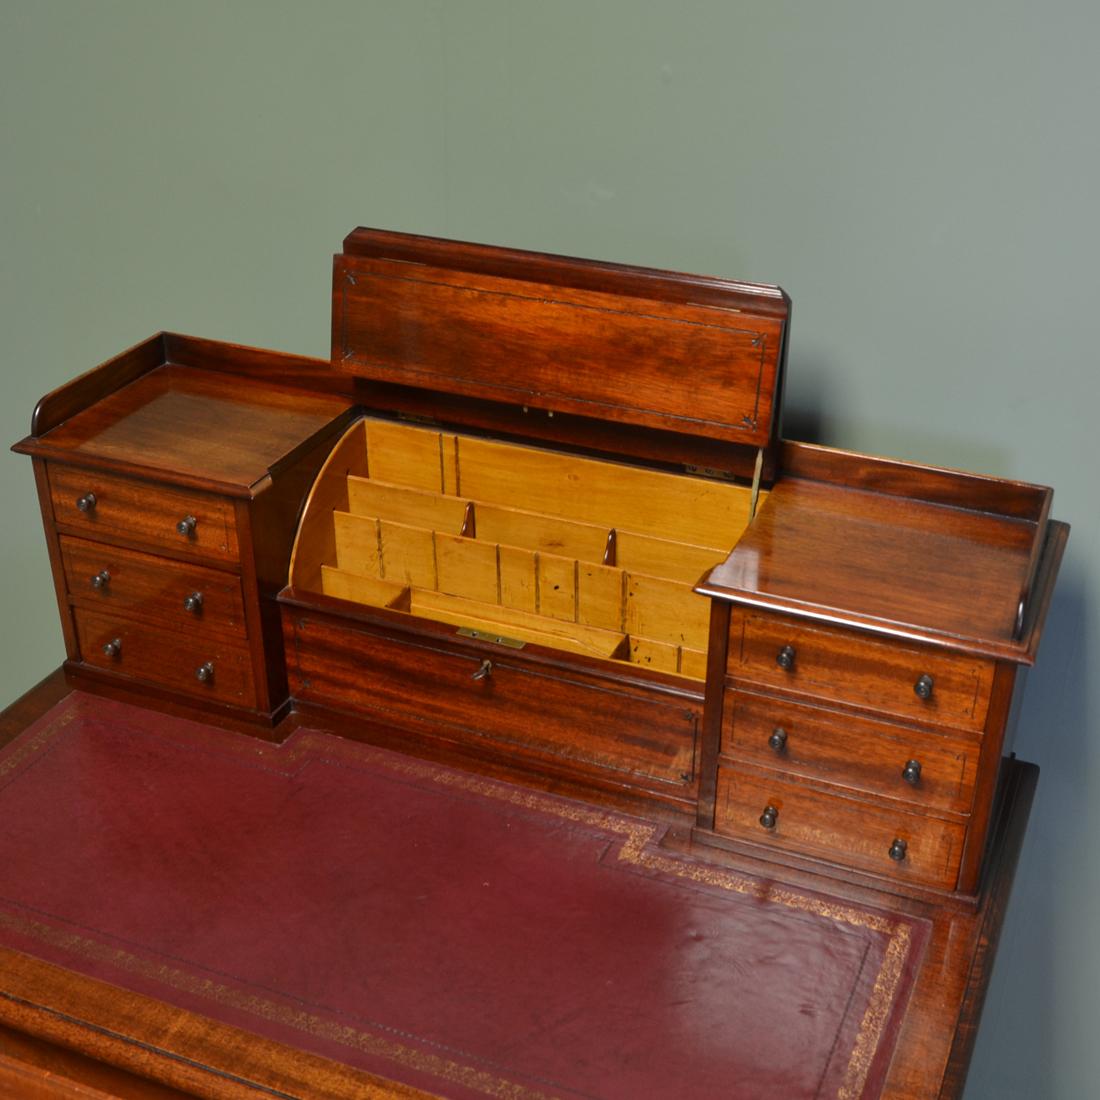 Striking Quality Victorian mahogany Bonheur Du Jour writing desk

In the Gillows design and of superb quality, this stunning writing desk dates from around 1880 and has a central lift up lid with stationary compartment, key with working lock